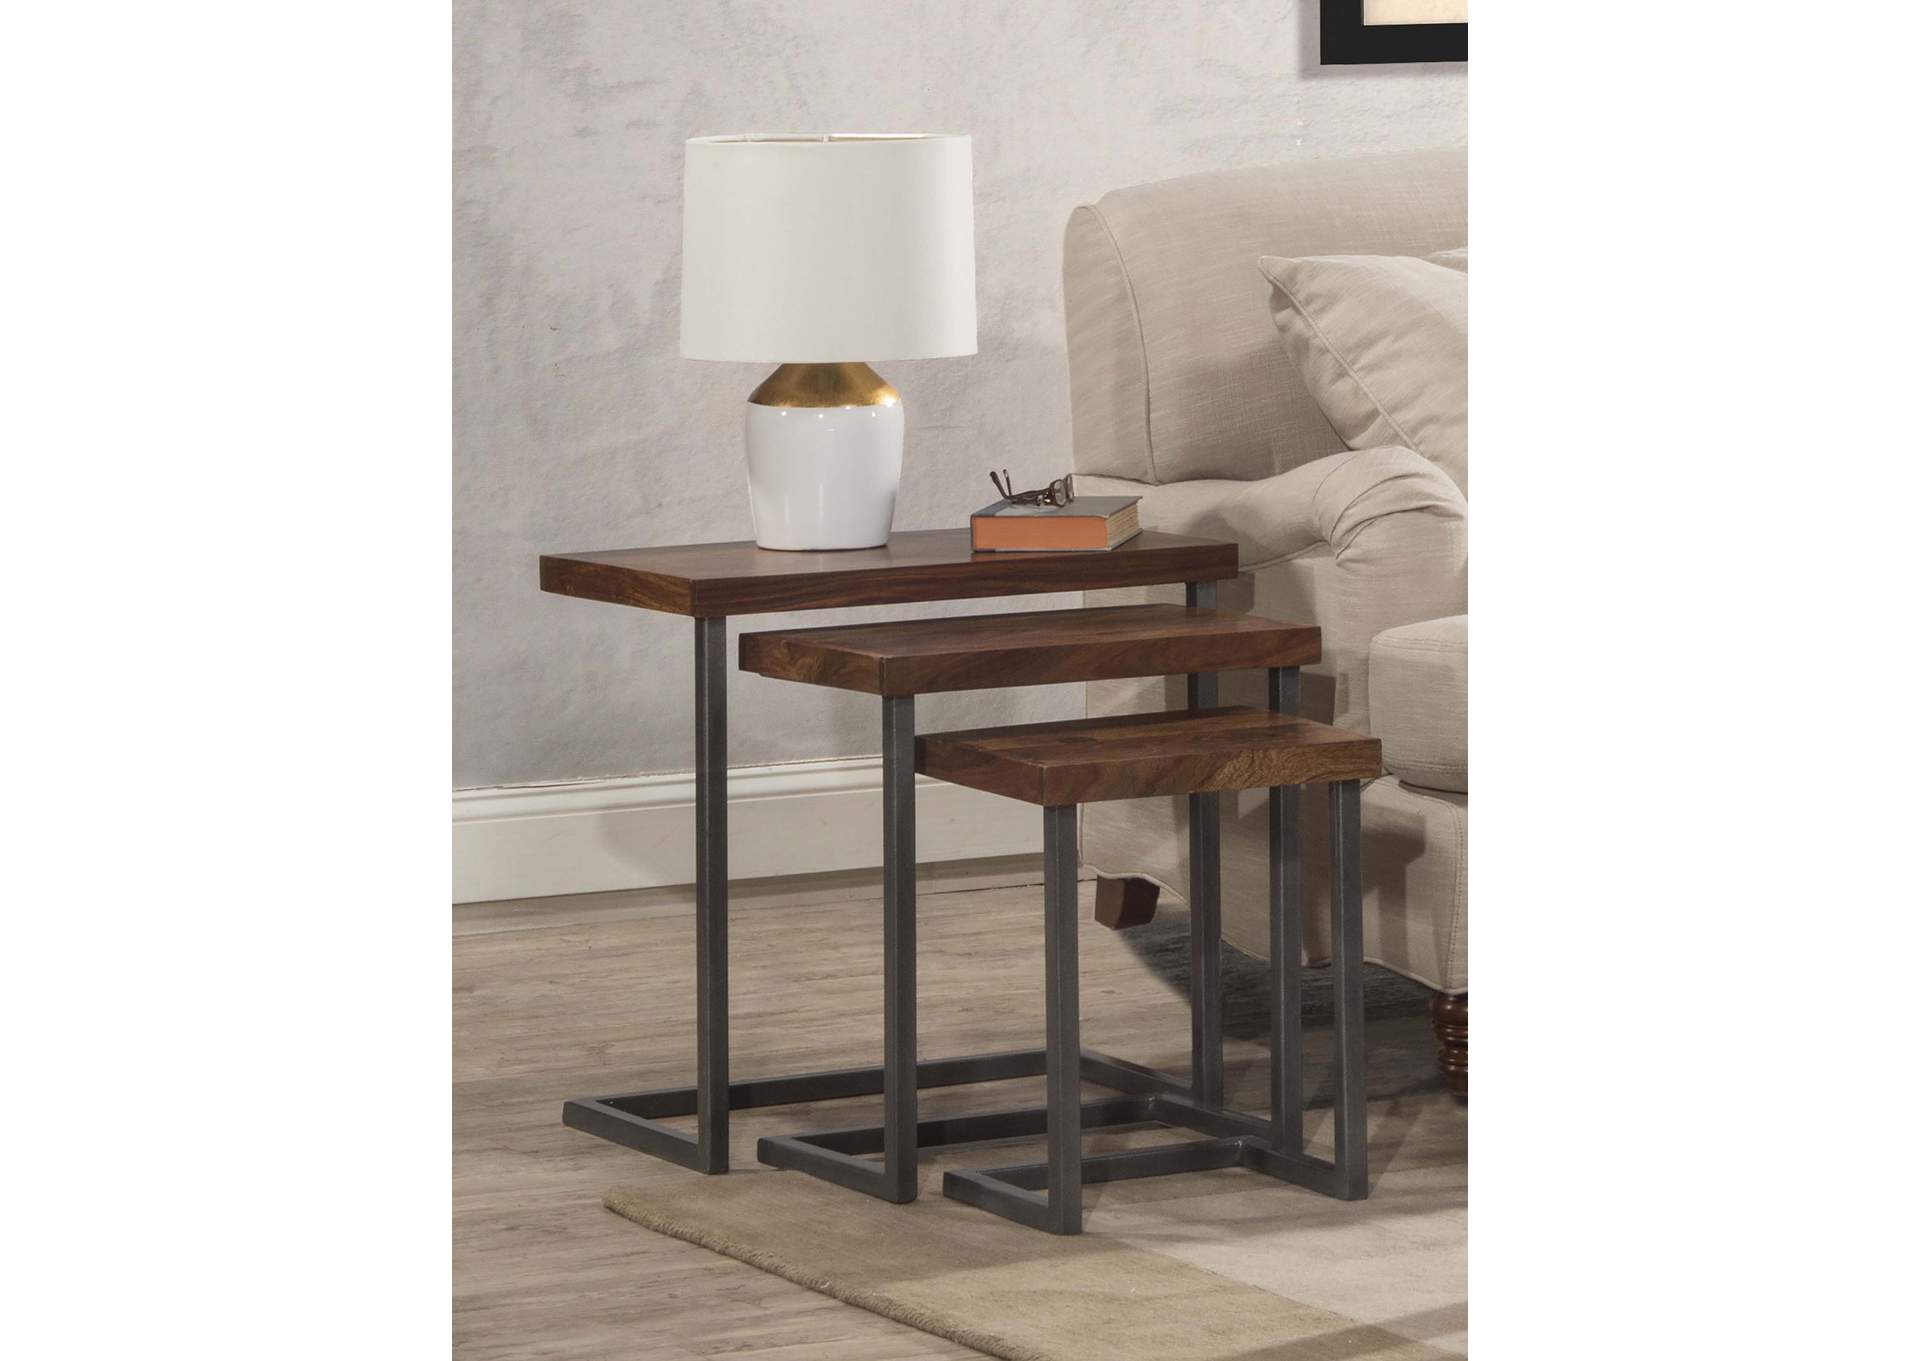 Emerson Nesting Tables - Set of 3,Hillsdale